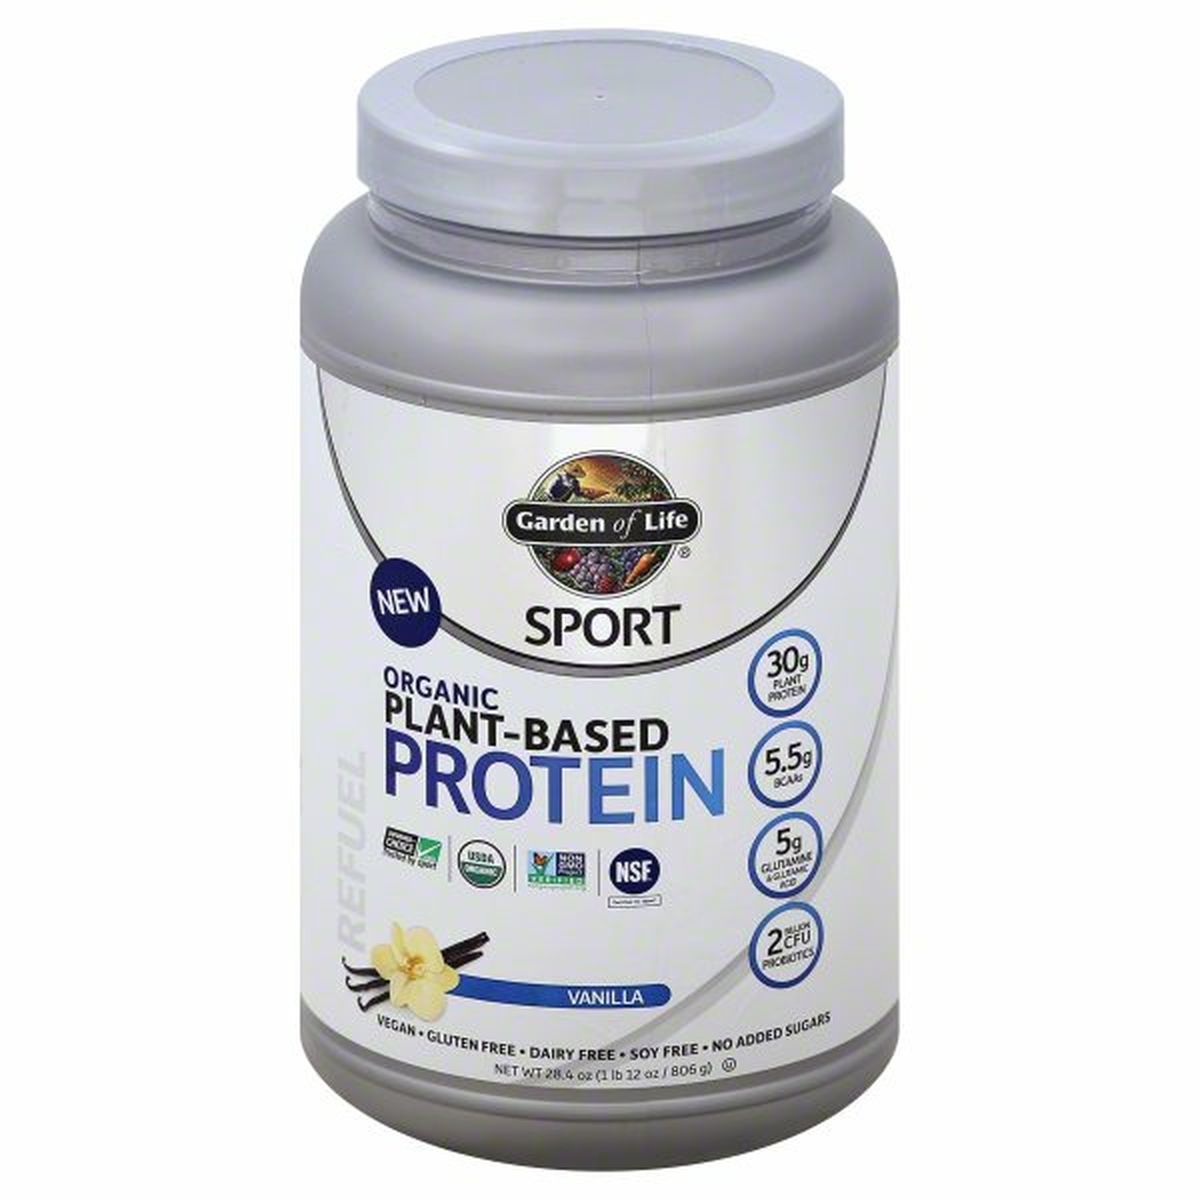 Calories in Garden of Life Sport Protein, Plant-Based, Organic, Vanilla